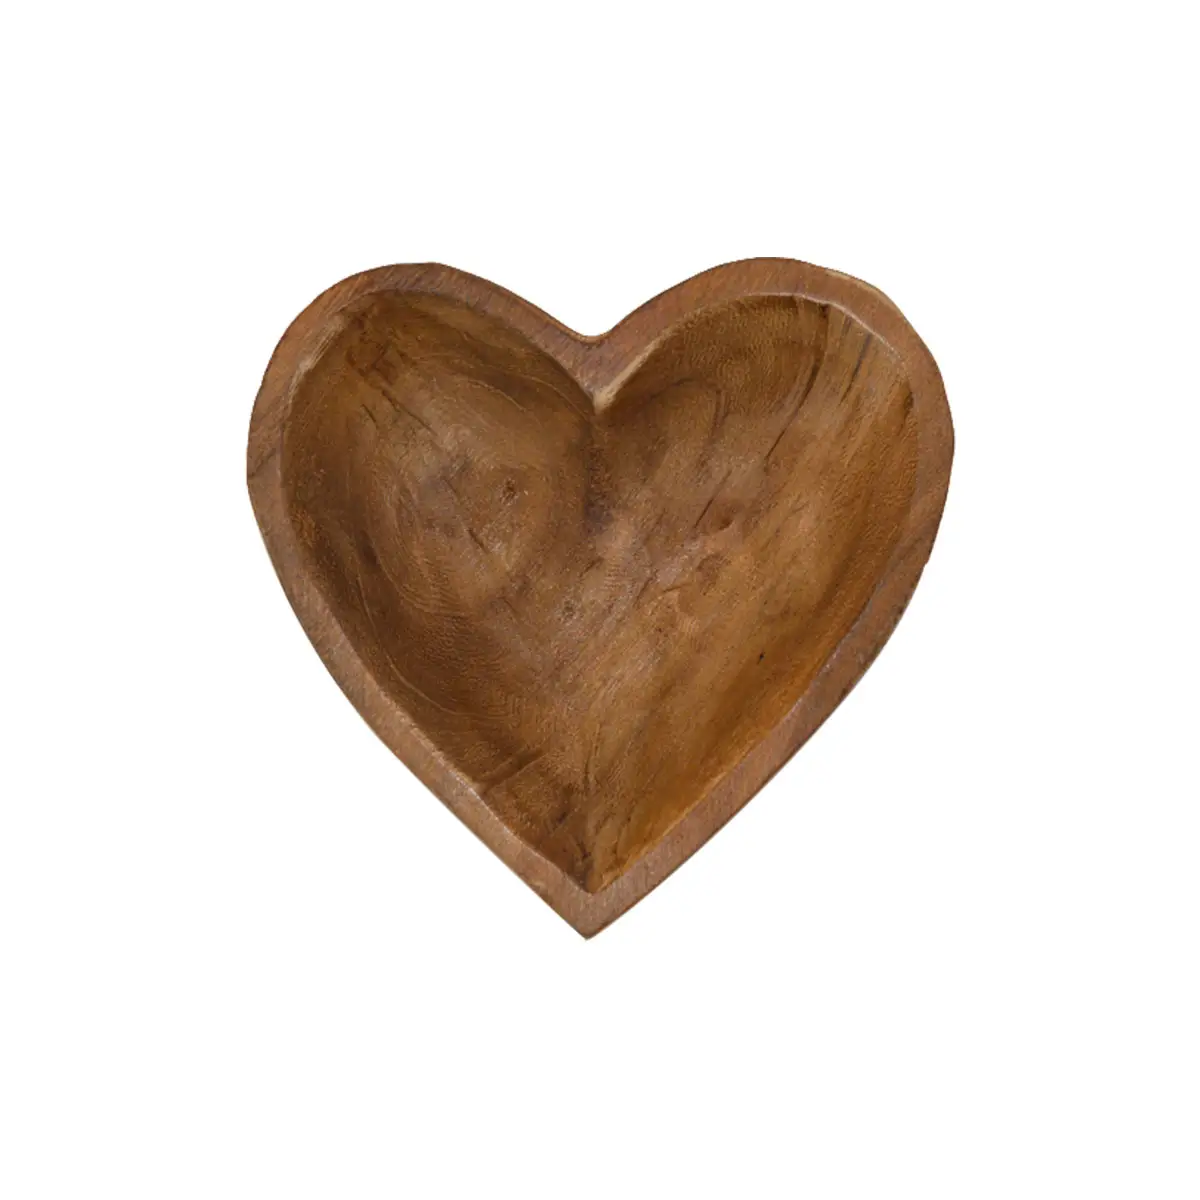 Unique design of the new wood tray hand carved wooden heart service tray fruit storage